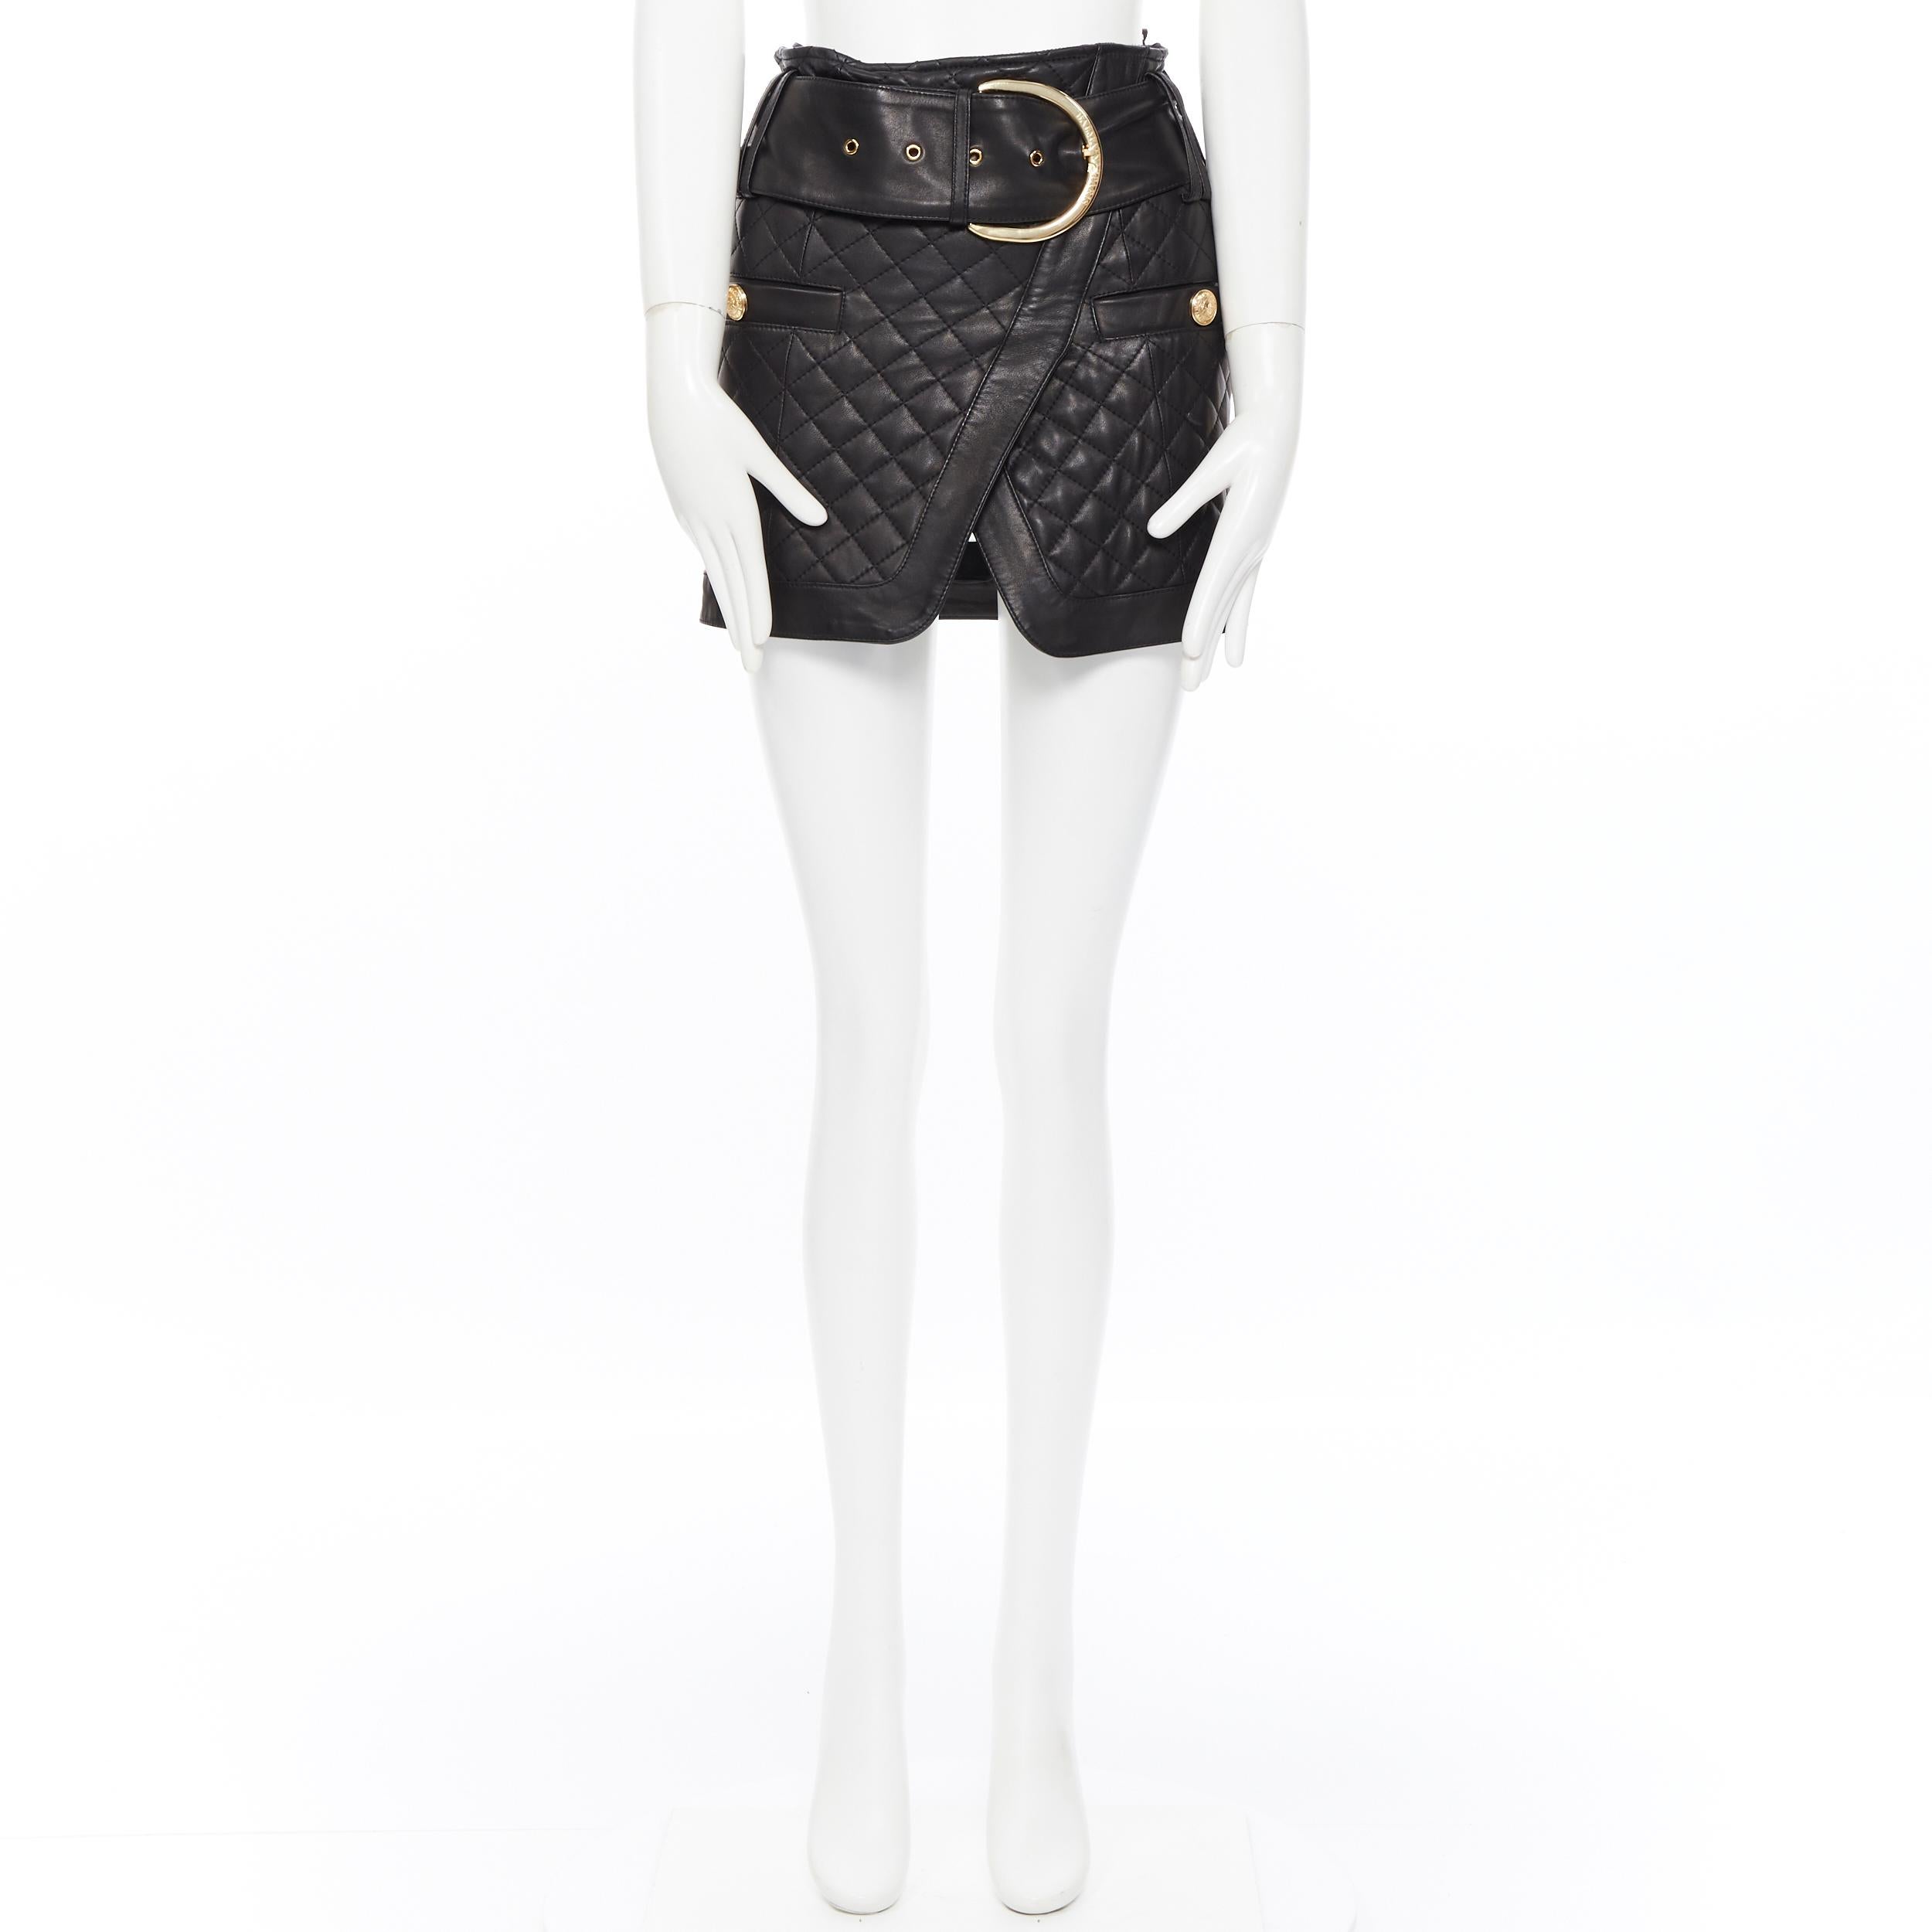 BALMAIN black quilted lamb leather gold large buckle military mini skirt FR34 XS
Brand: Balmain
Designer: Olivier Rousteing
Model Name / Style: Leather skirt
Material: Leather
Color: Black
Pattern: Solid
Closure: Zip
Lining material: Fabric
Extra